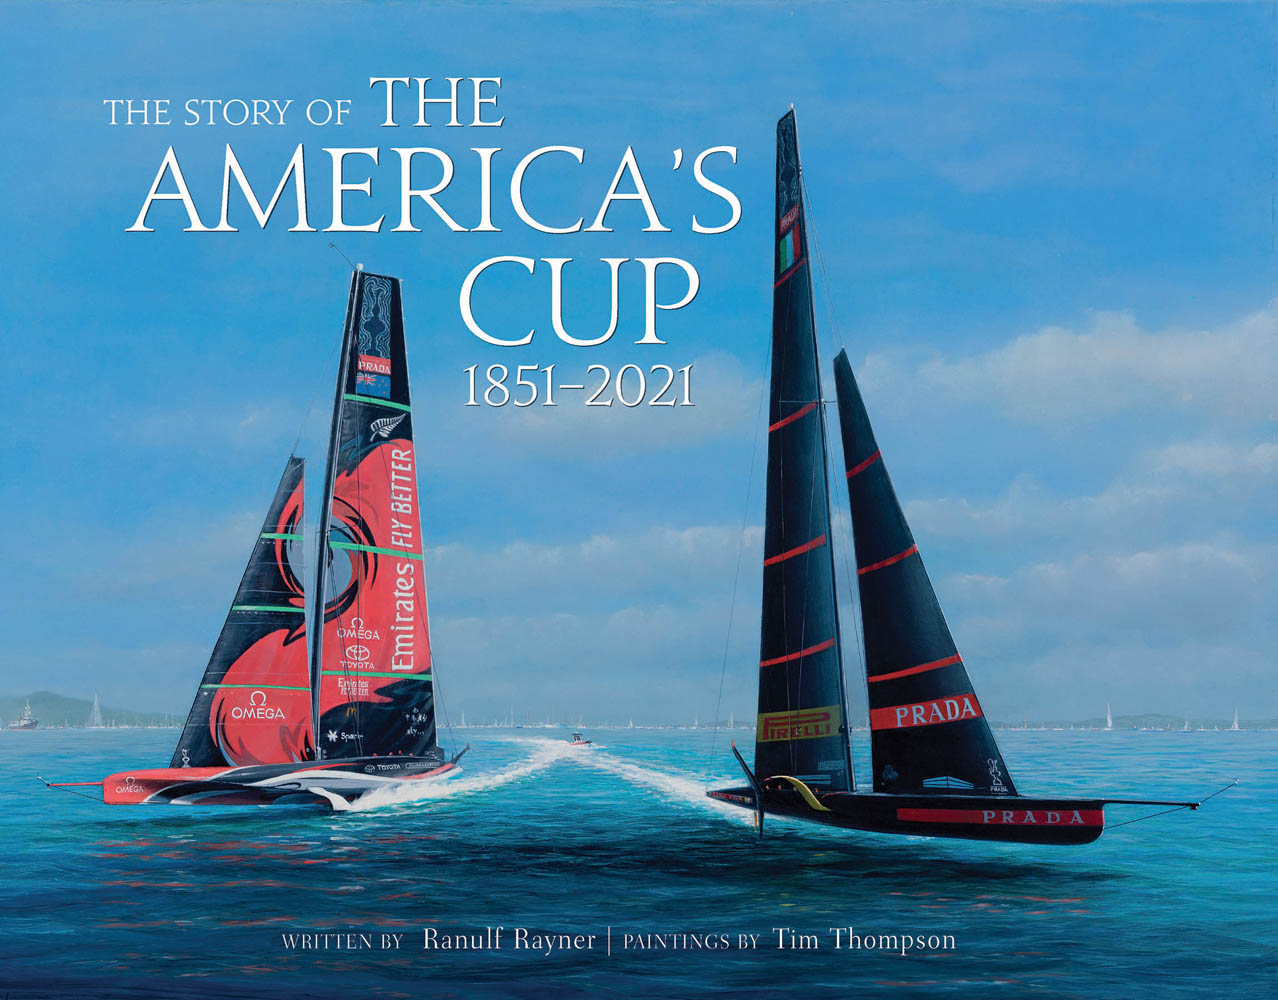 Two large yachts in a race on the ocean, under blue sky, THE STORY OF THE AMERICA'S CUP 1851-2021 in white font above.